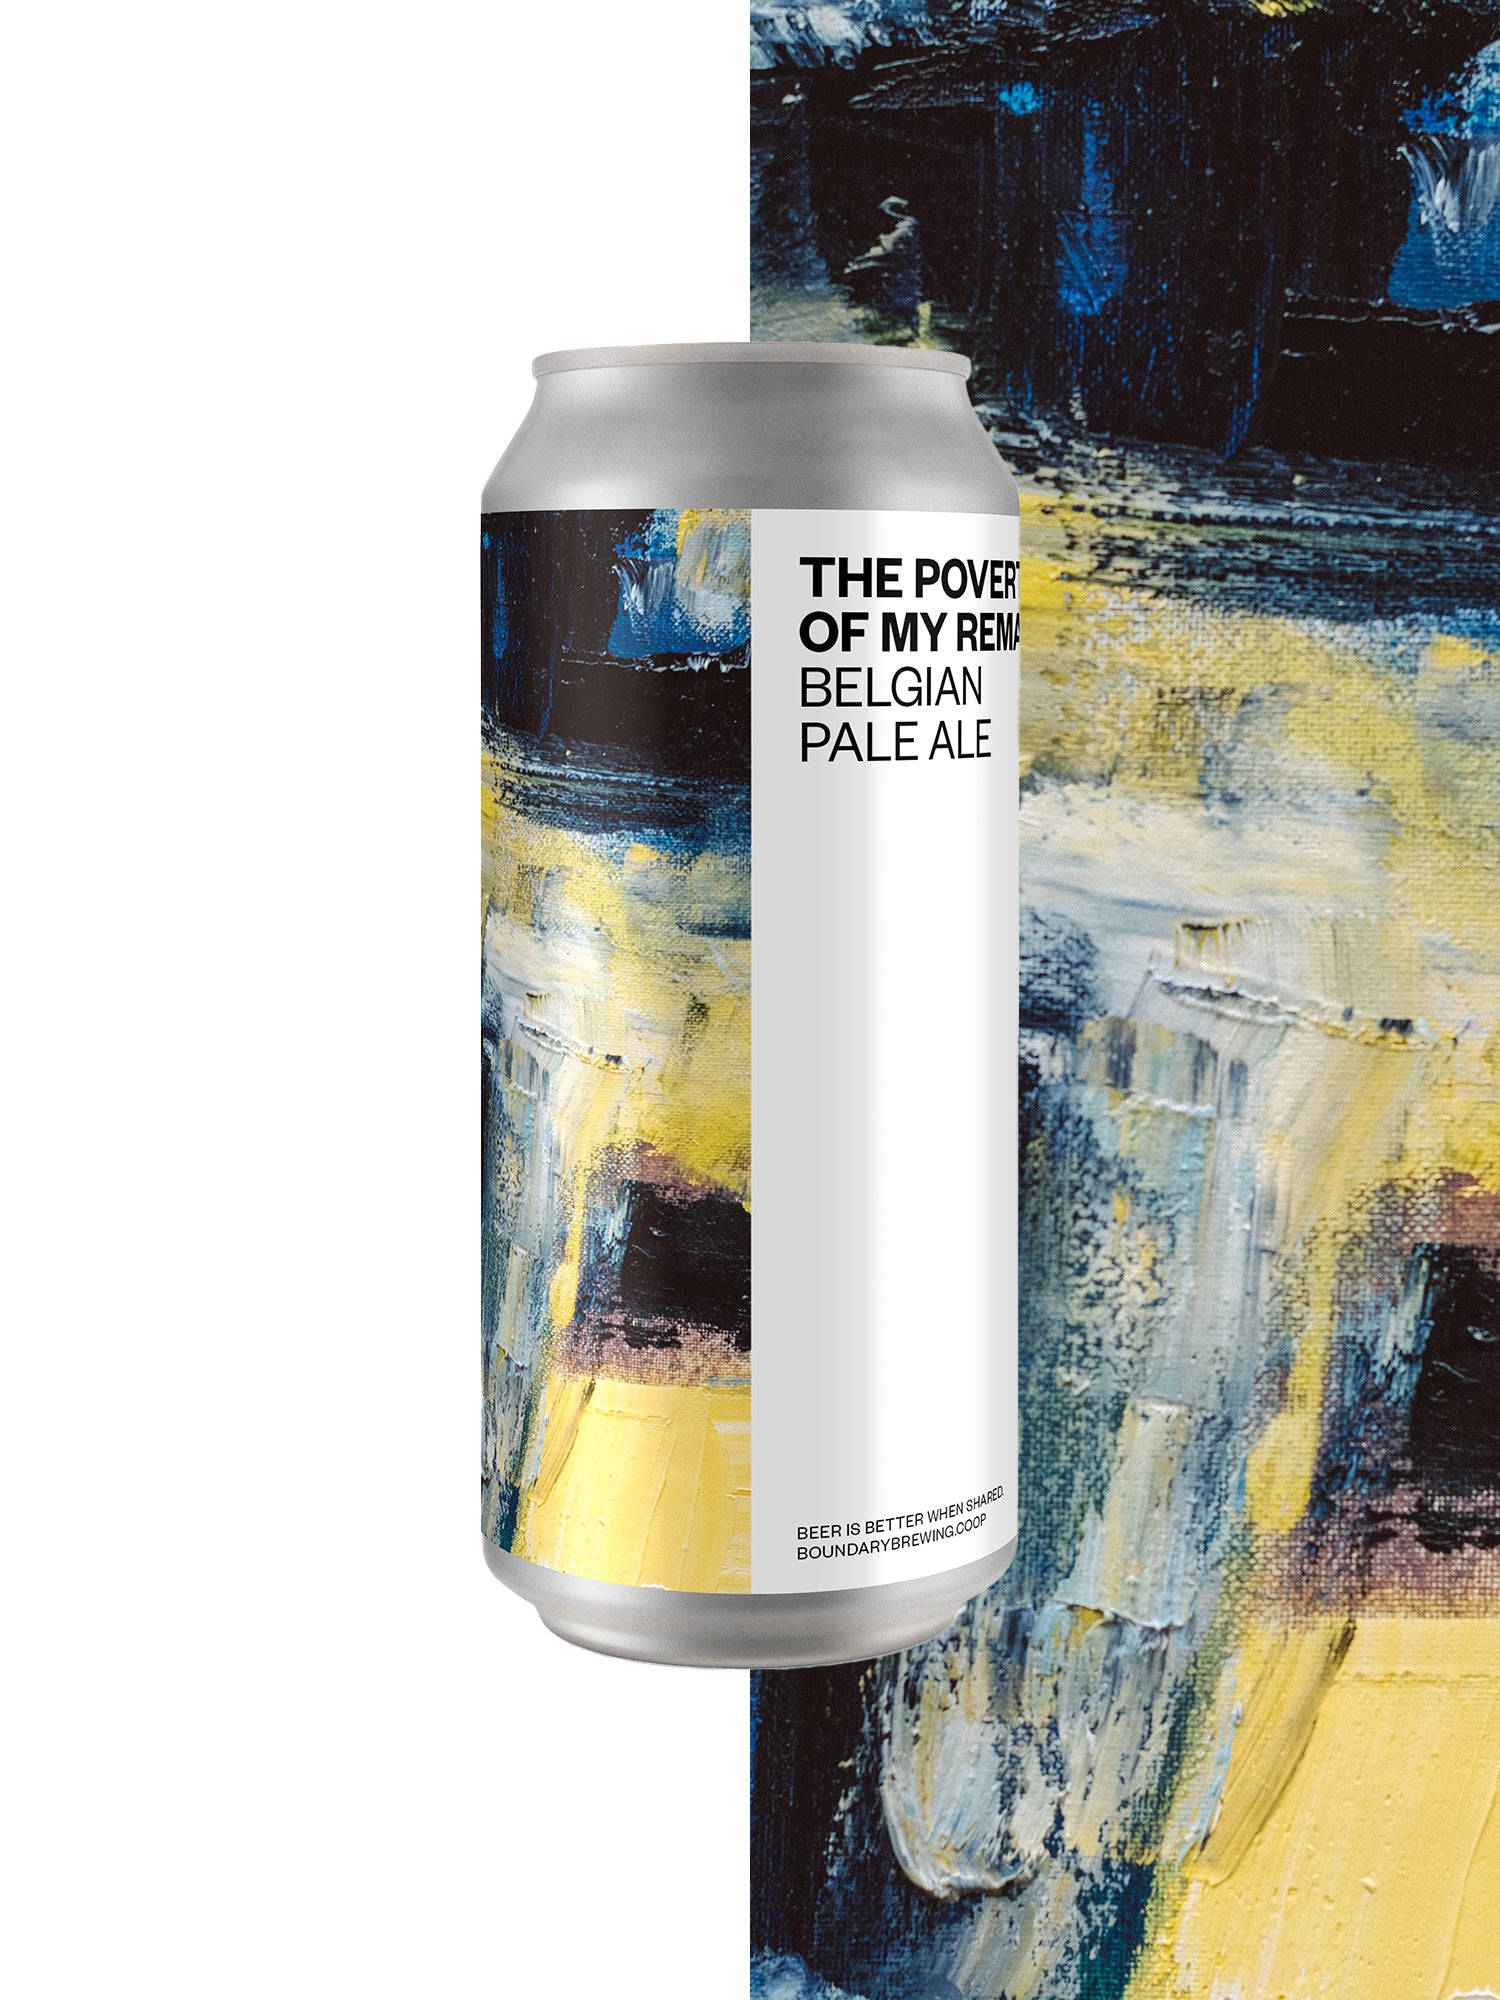 THE POVERTY OF MY REMARKS Belgian Pale Ale (4-pack) 4.8%